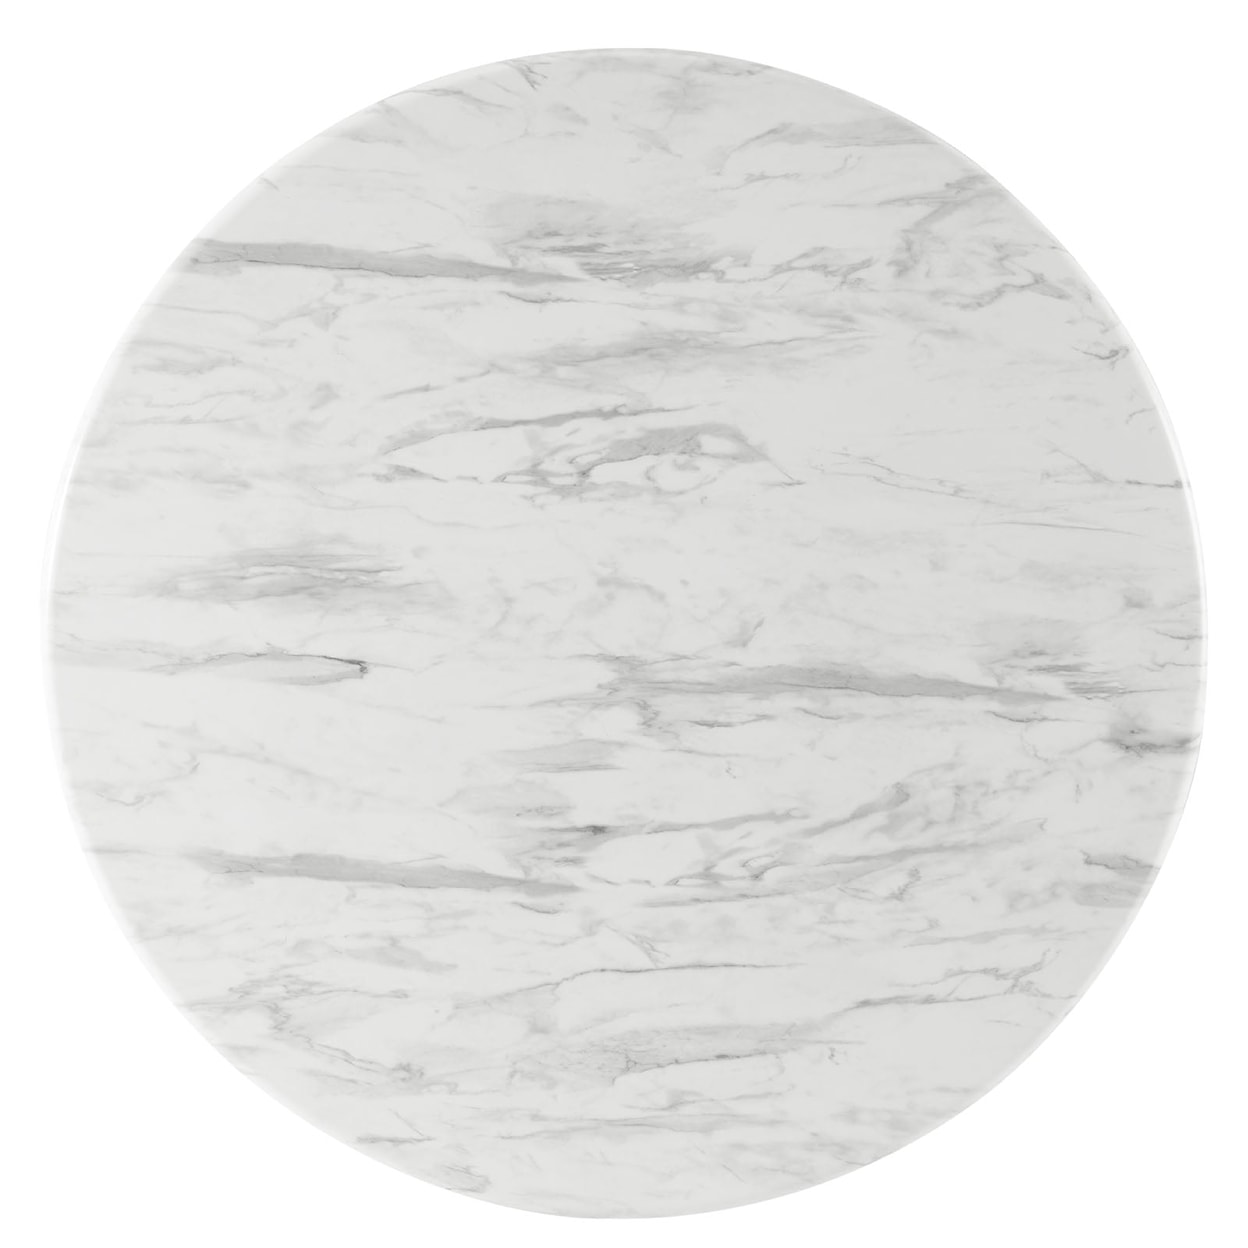 Modway Gallant Gallant 50" Marble Dining Table